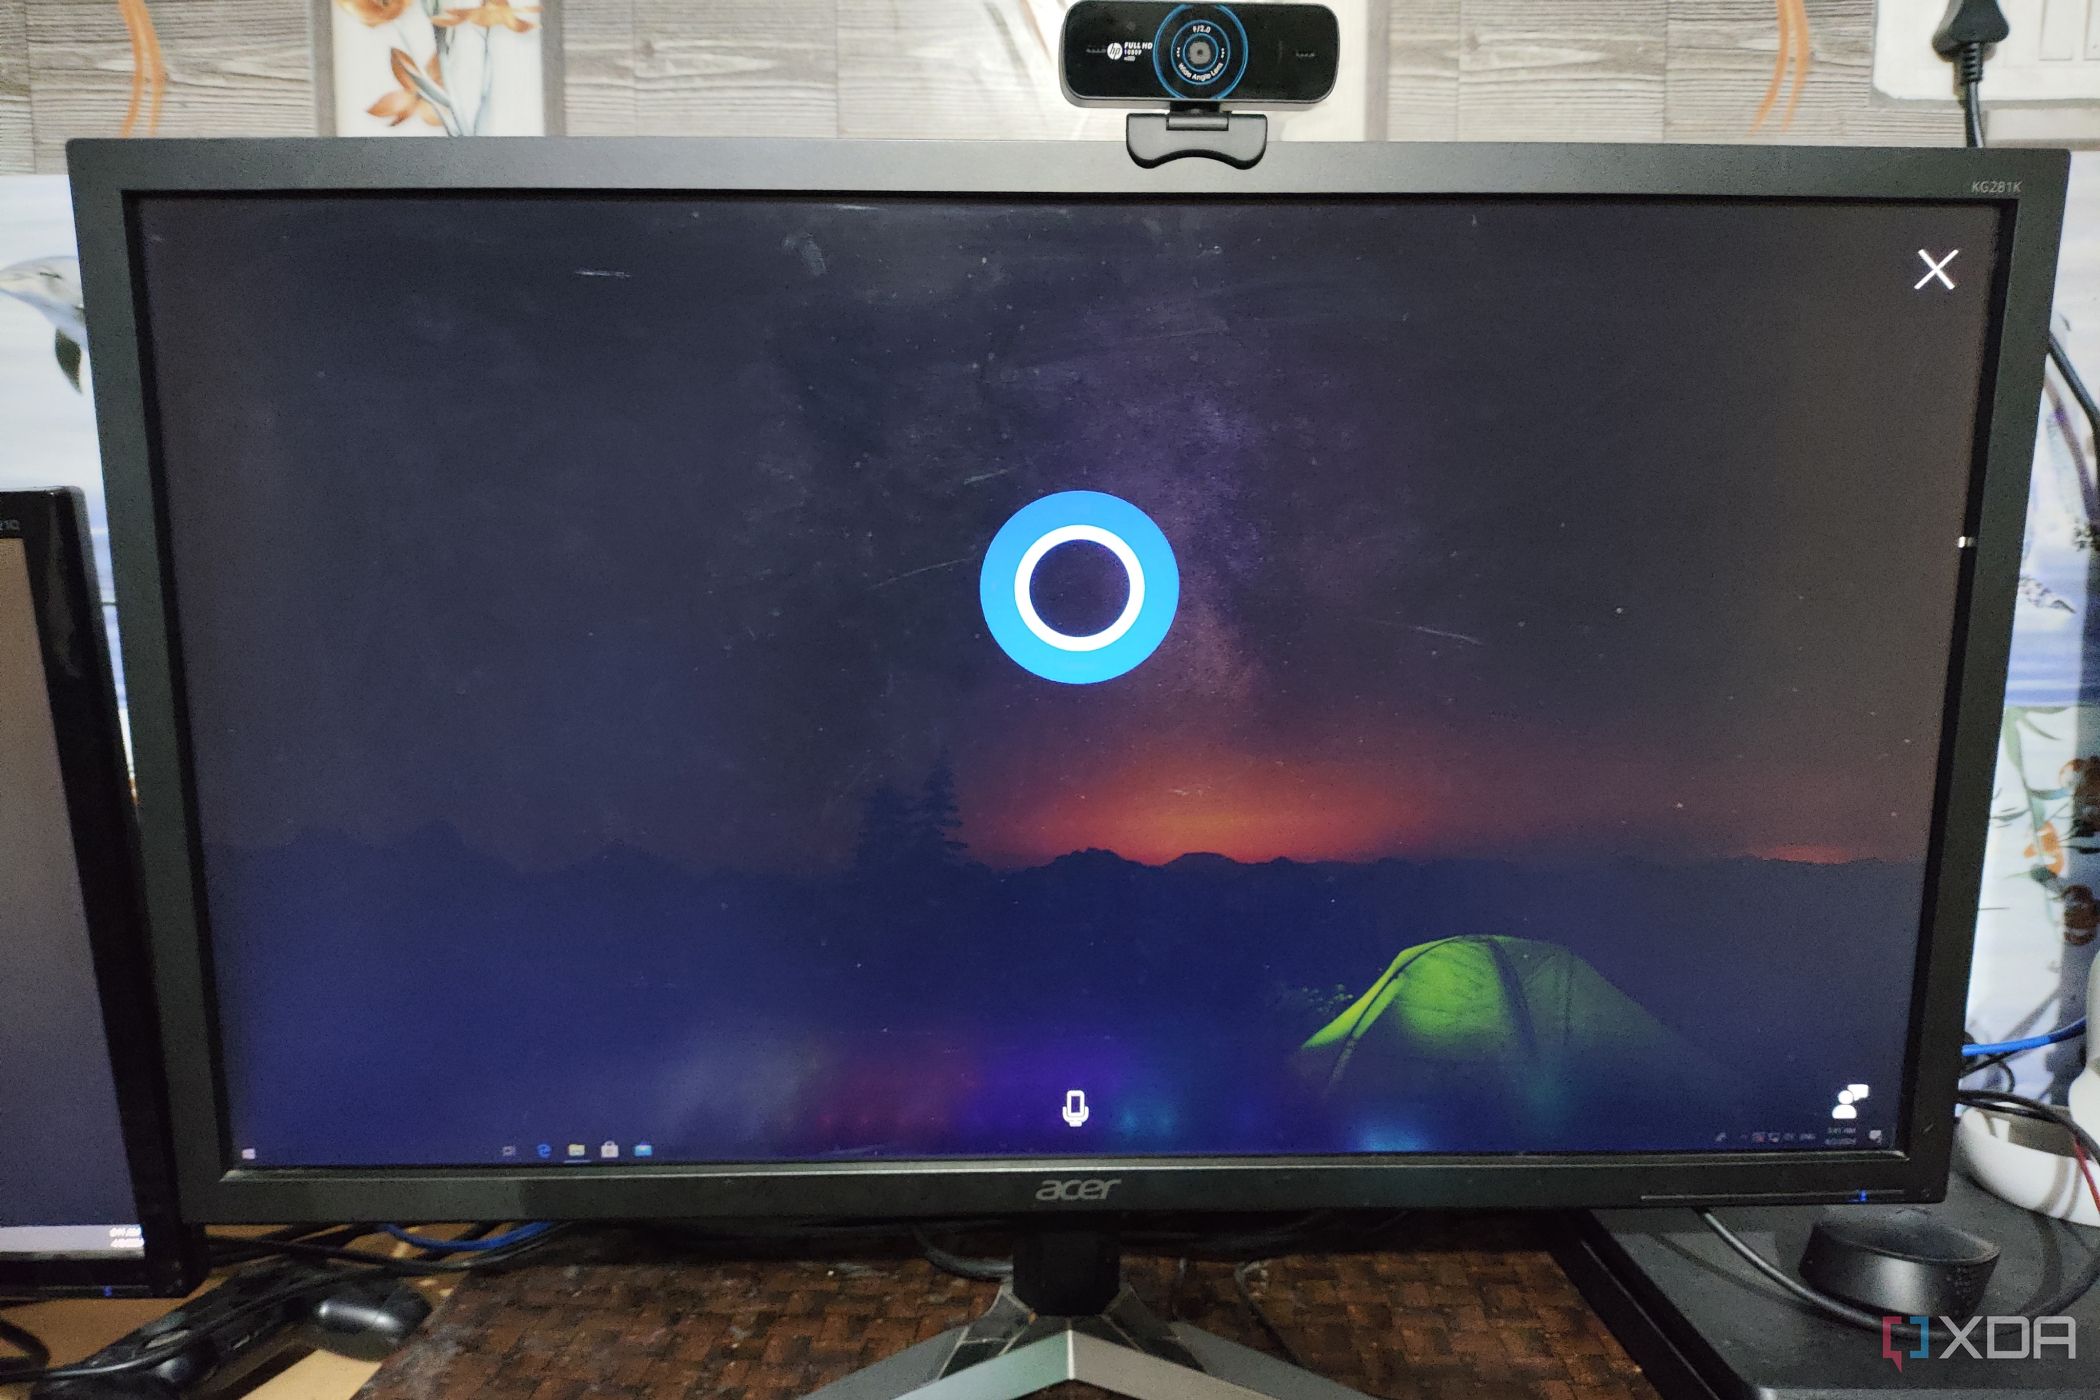 Cortana running on an outdated version of Windows 10